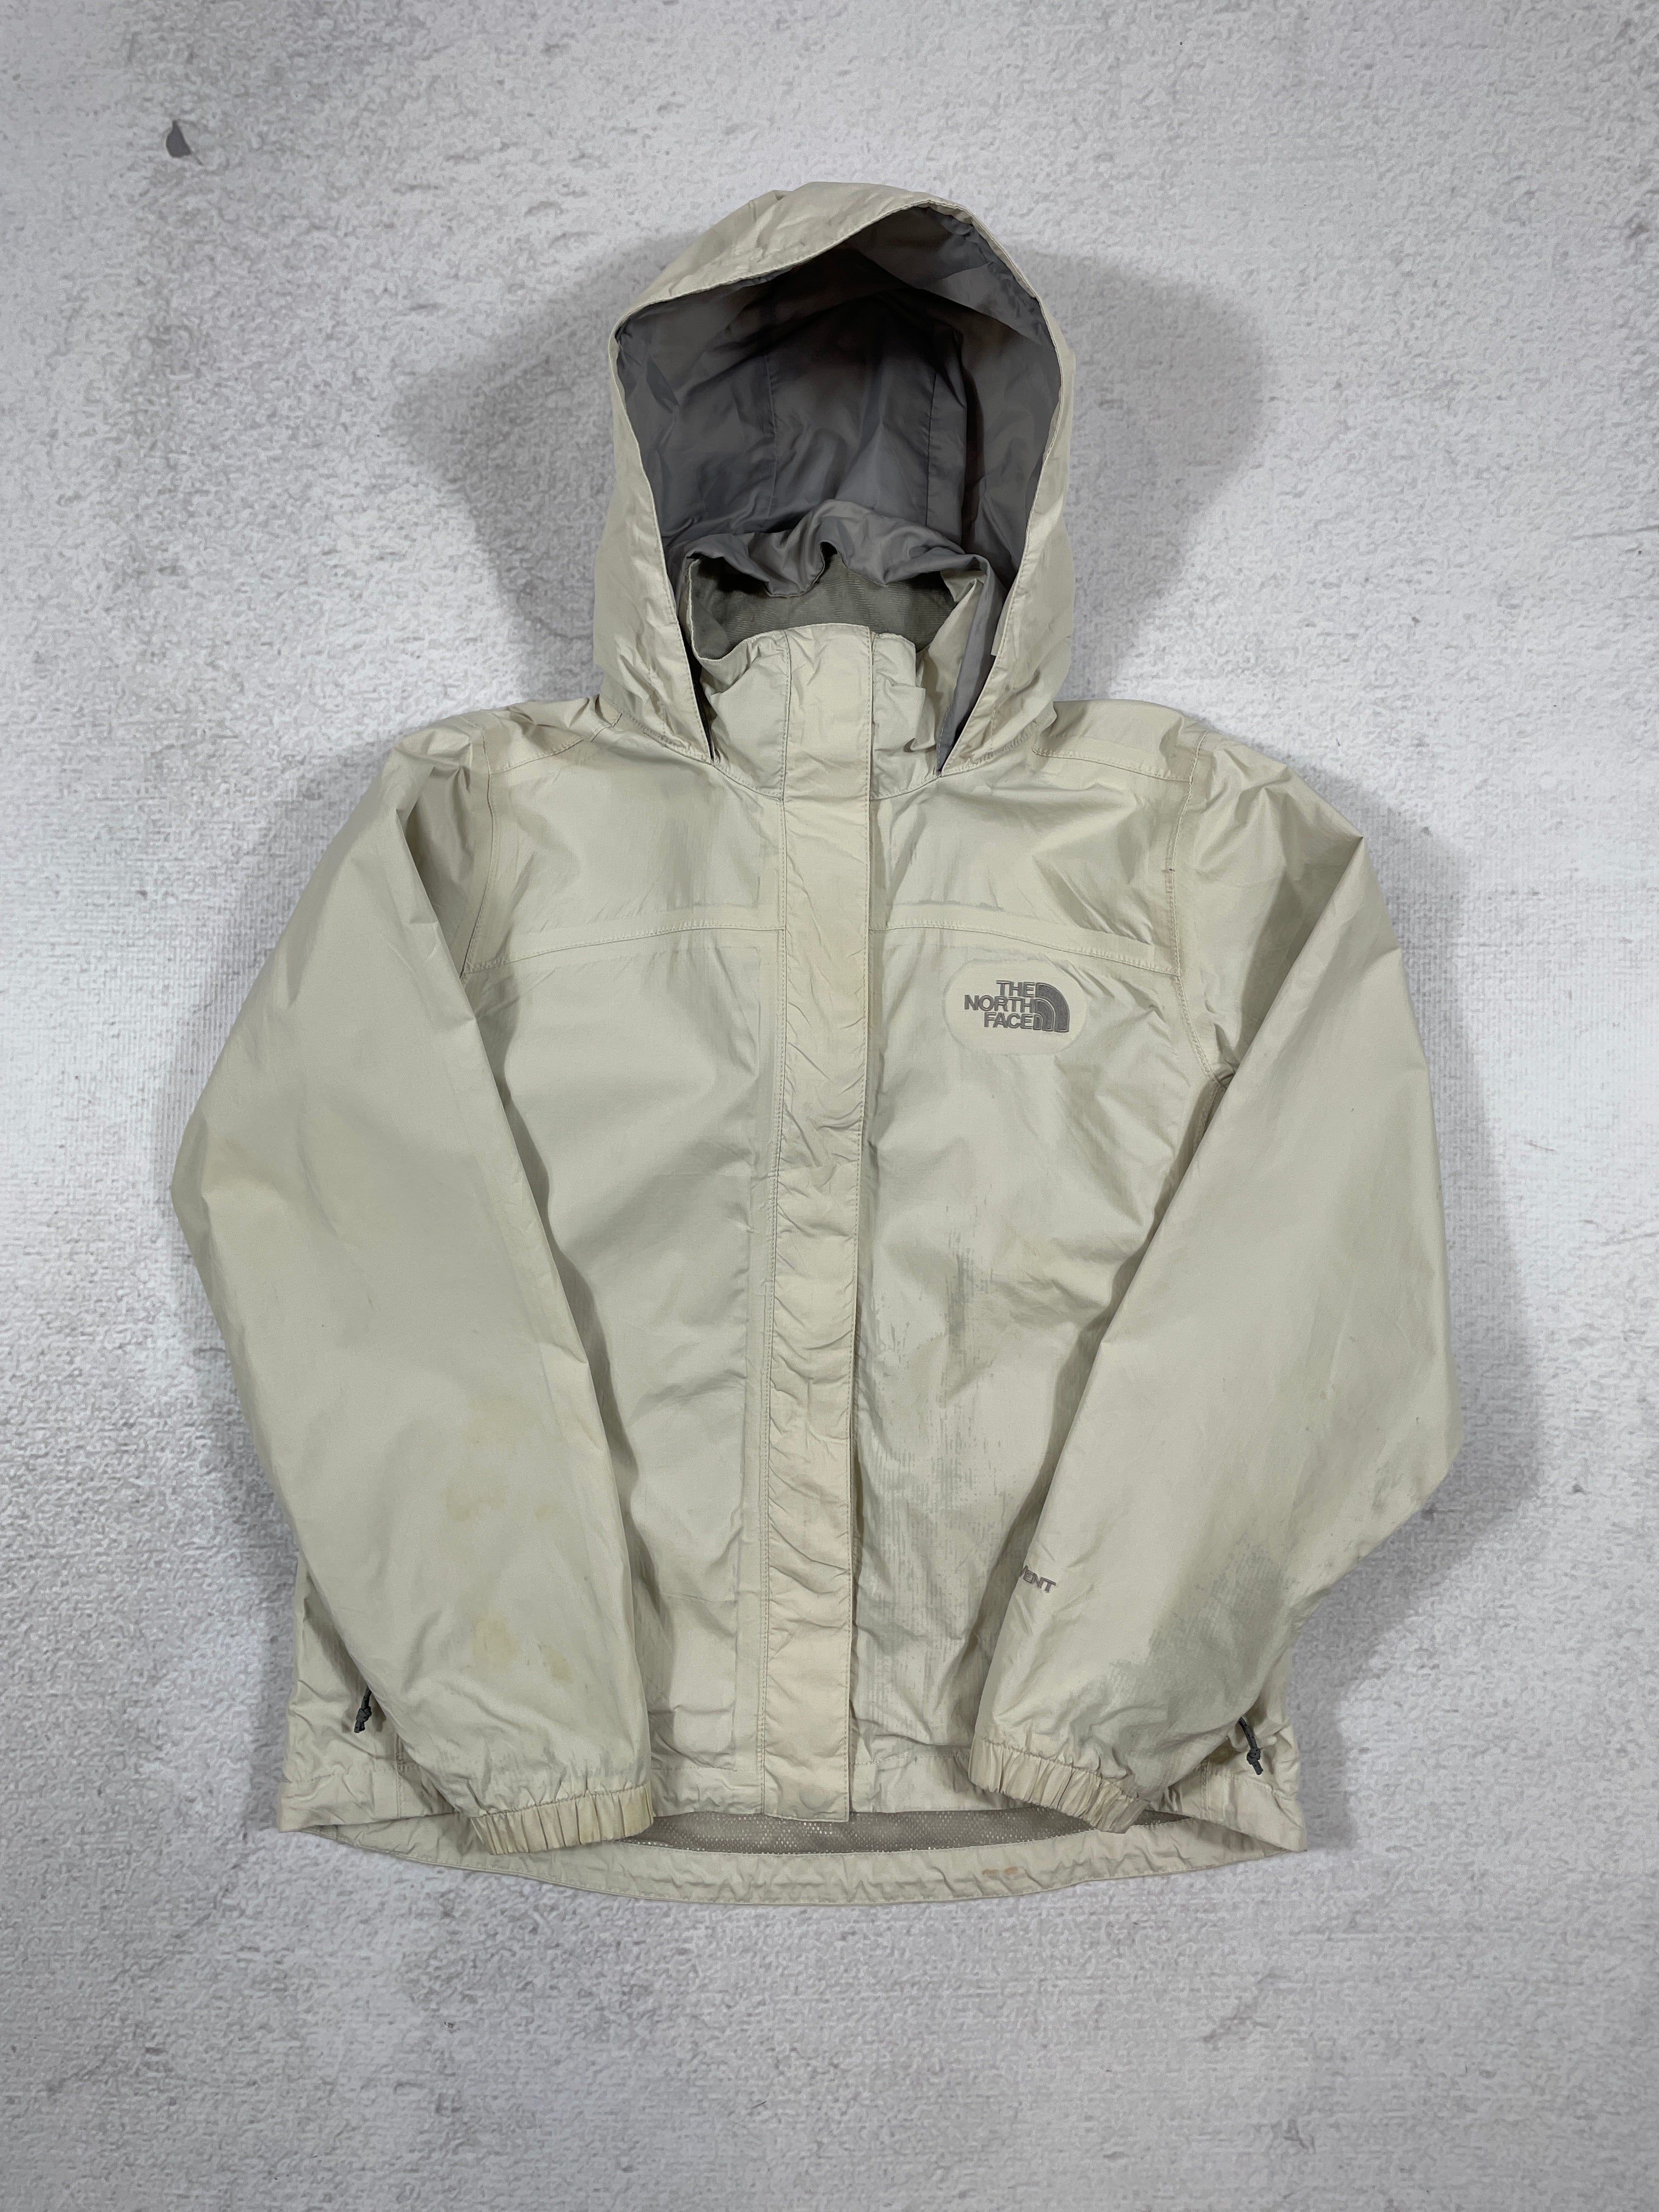 Vintage The North Face HyVent Lightweight Jacket - Women's Small